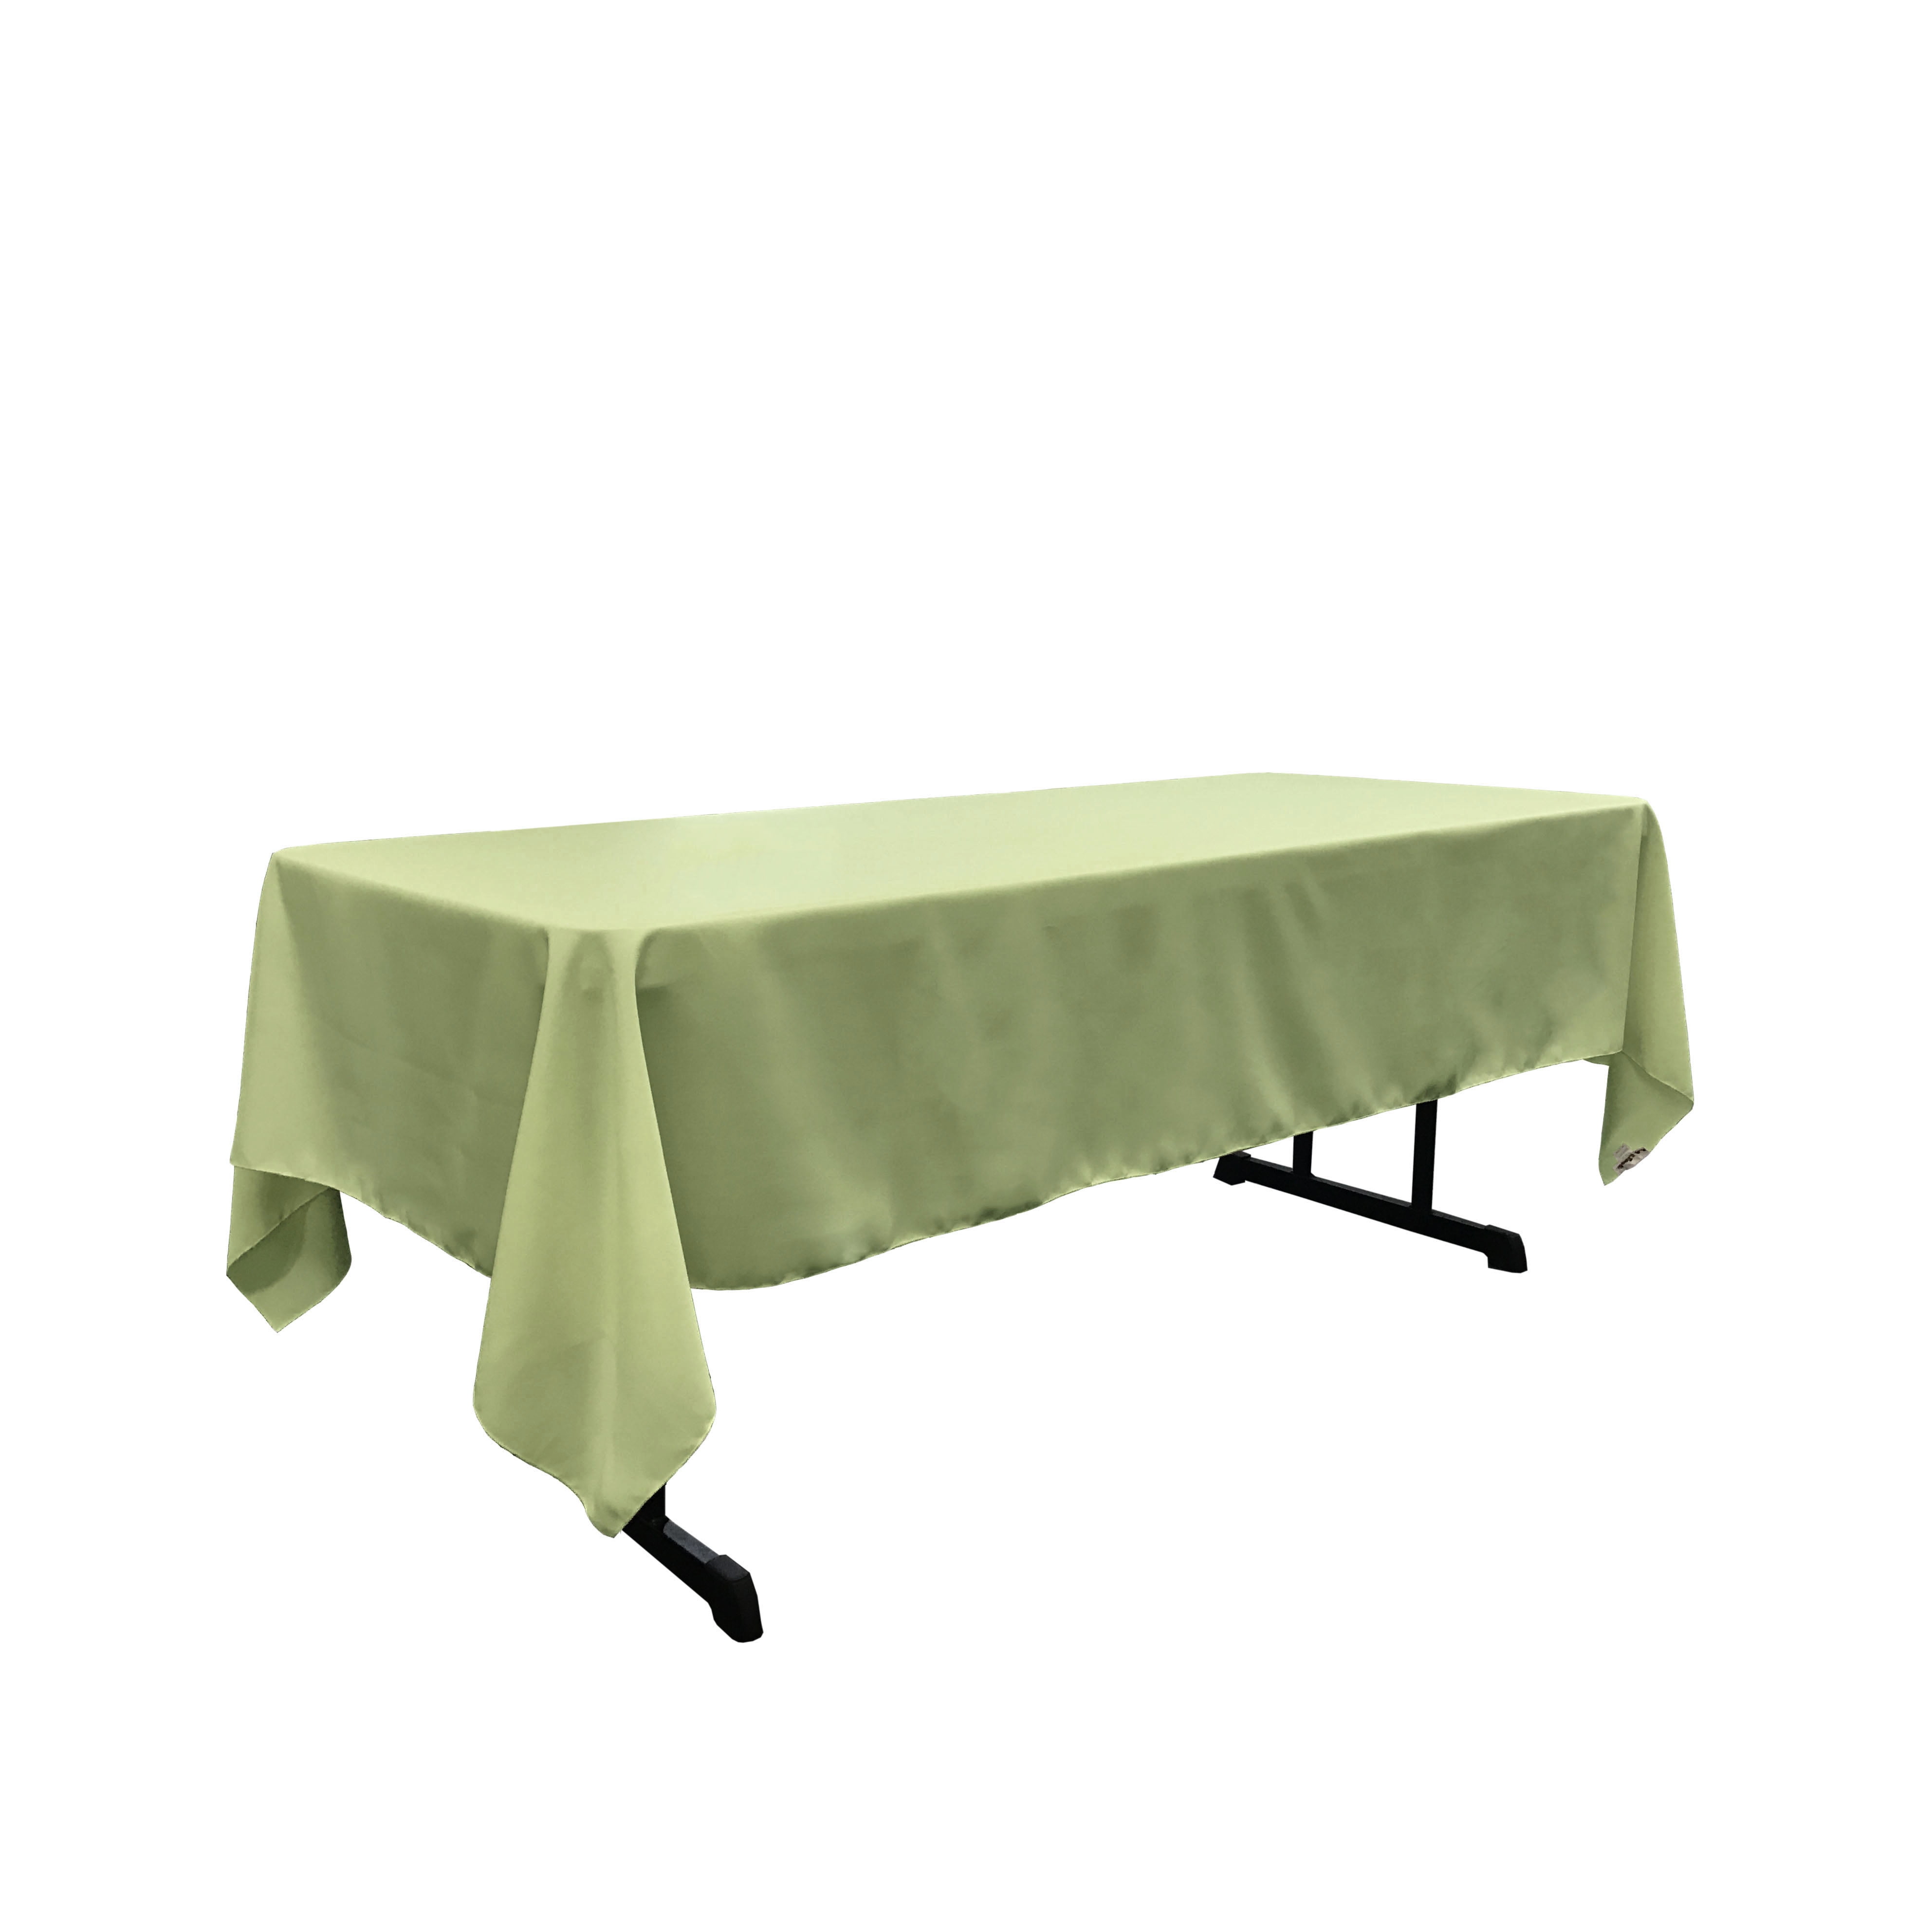 La Linen Polyester Poplin 60 By 108, What Size Tablecloth For 60 X 72 Table